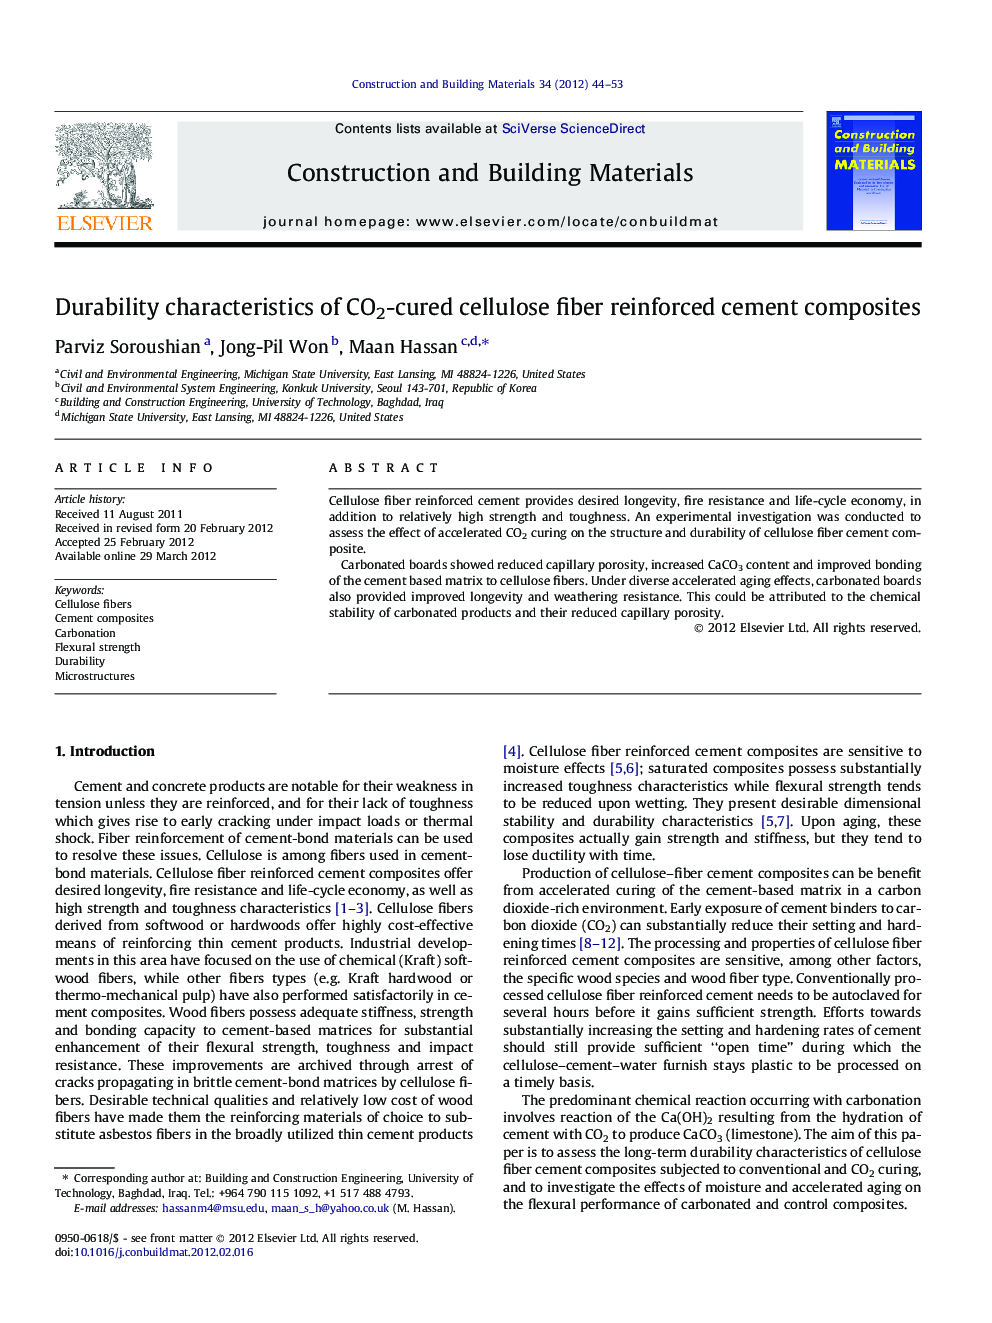 Durability characteristics of CO2-cured cellulose fiber reinforced cement composites